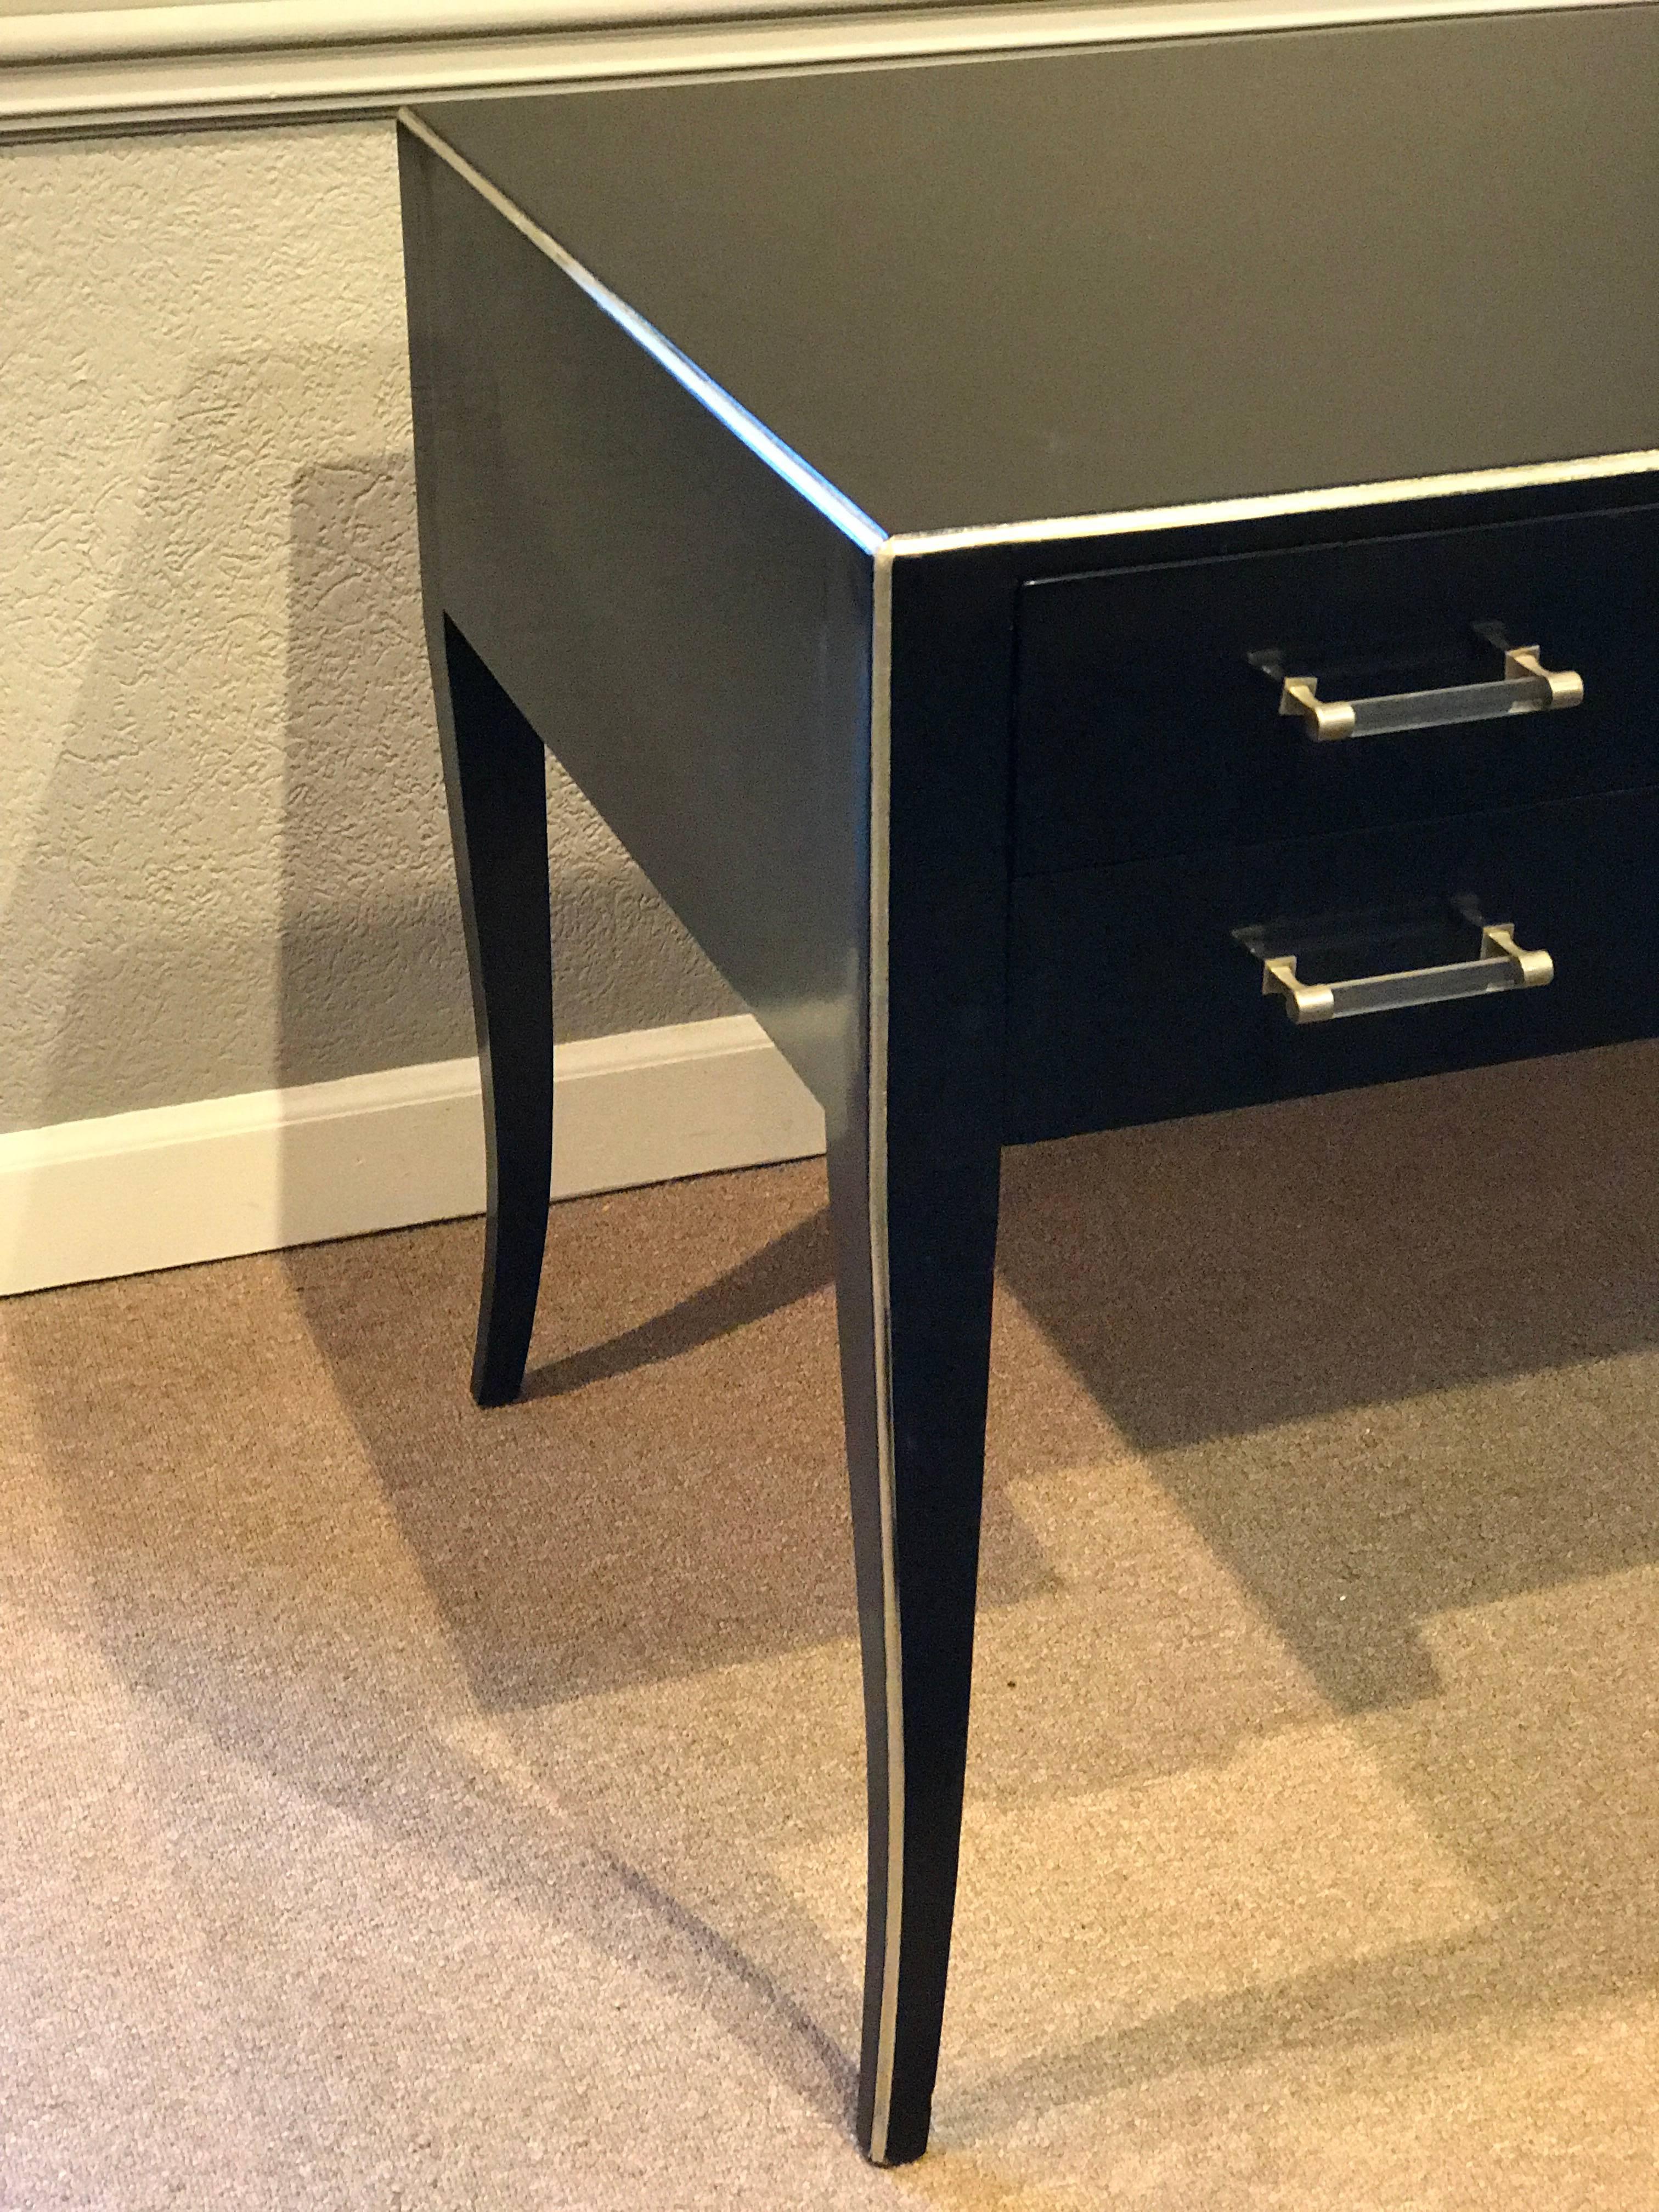 French modern design black lacquered desk with Lucite handles. Minimal and sleek with silver leaf trim, fitted with five drawers, raised on four tapering legs.
The desk opening is 25.5